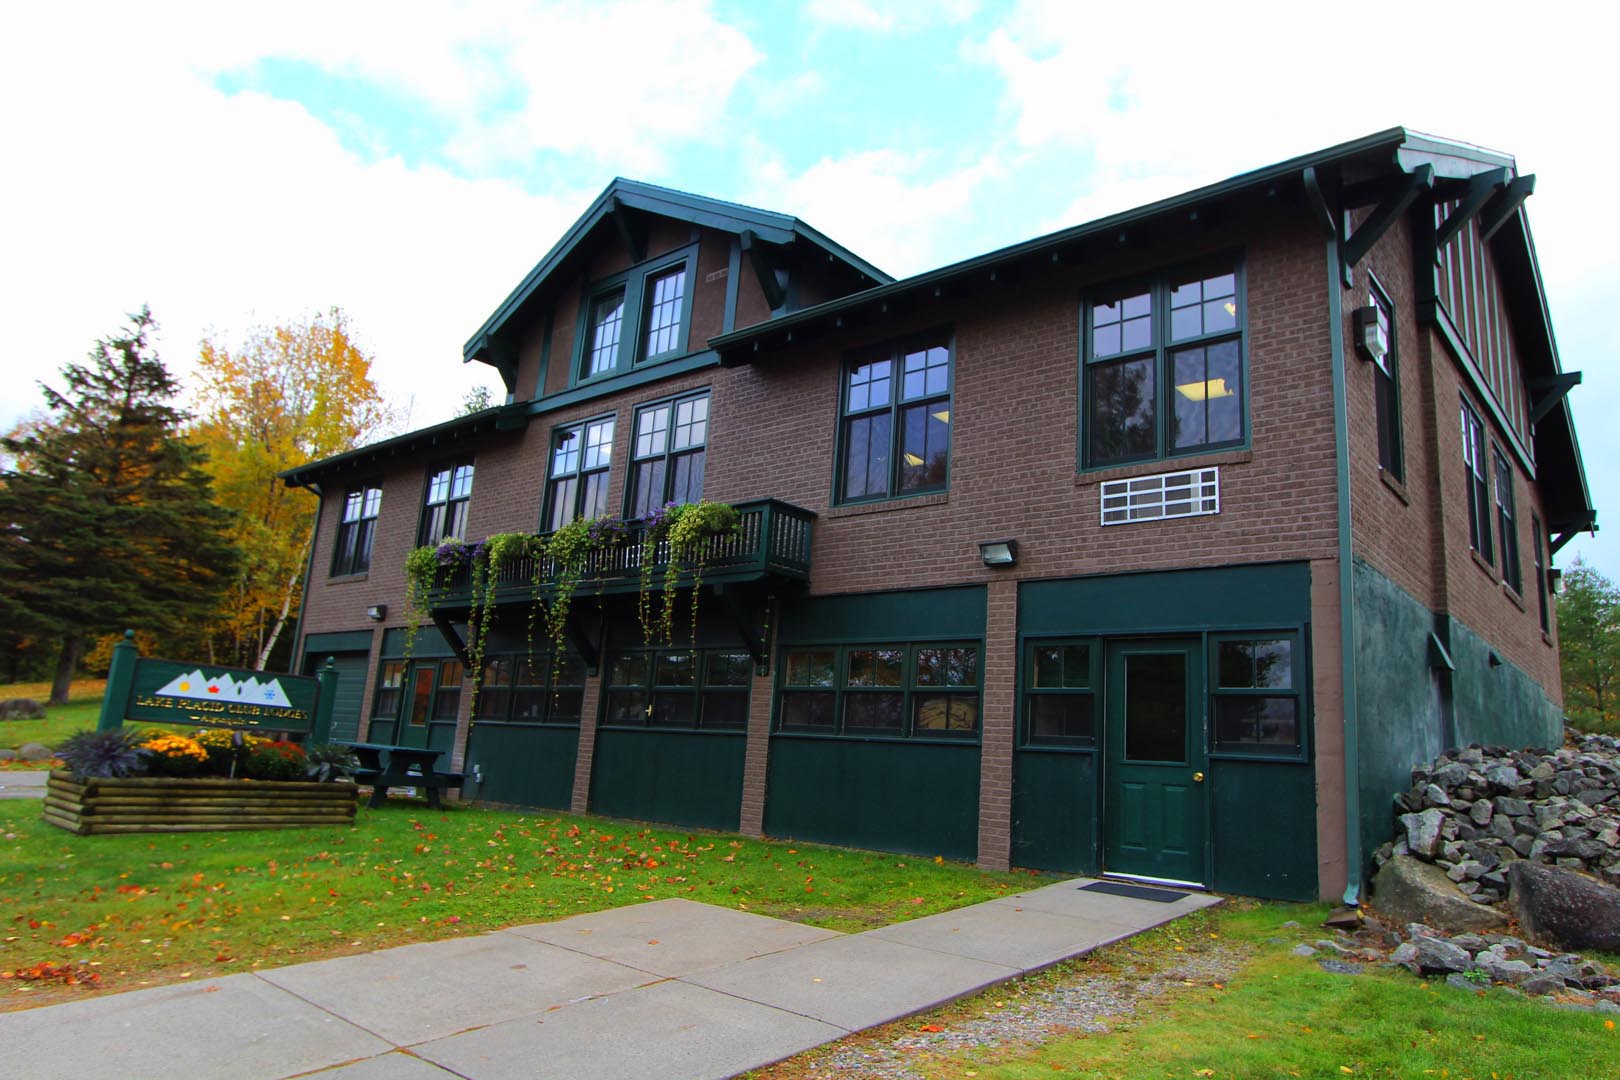 A view of the exterior building at VRI's Lake Placid Club Lodges in New York.